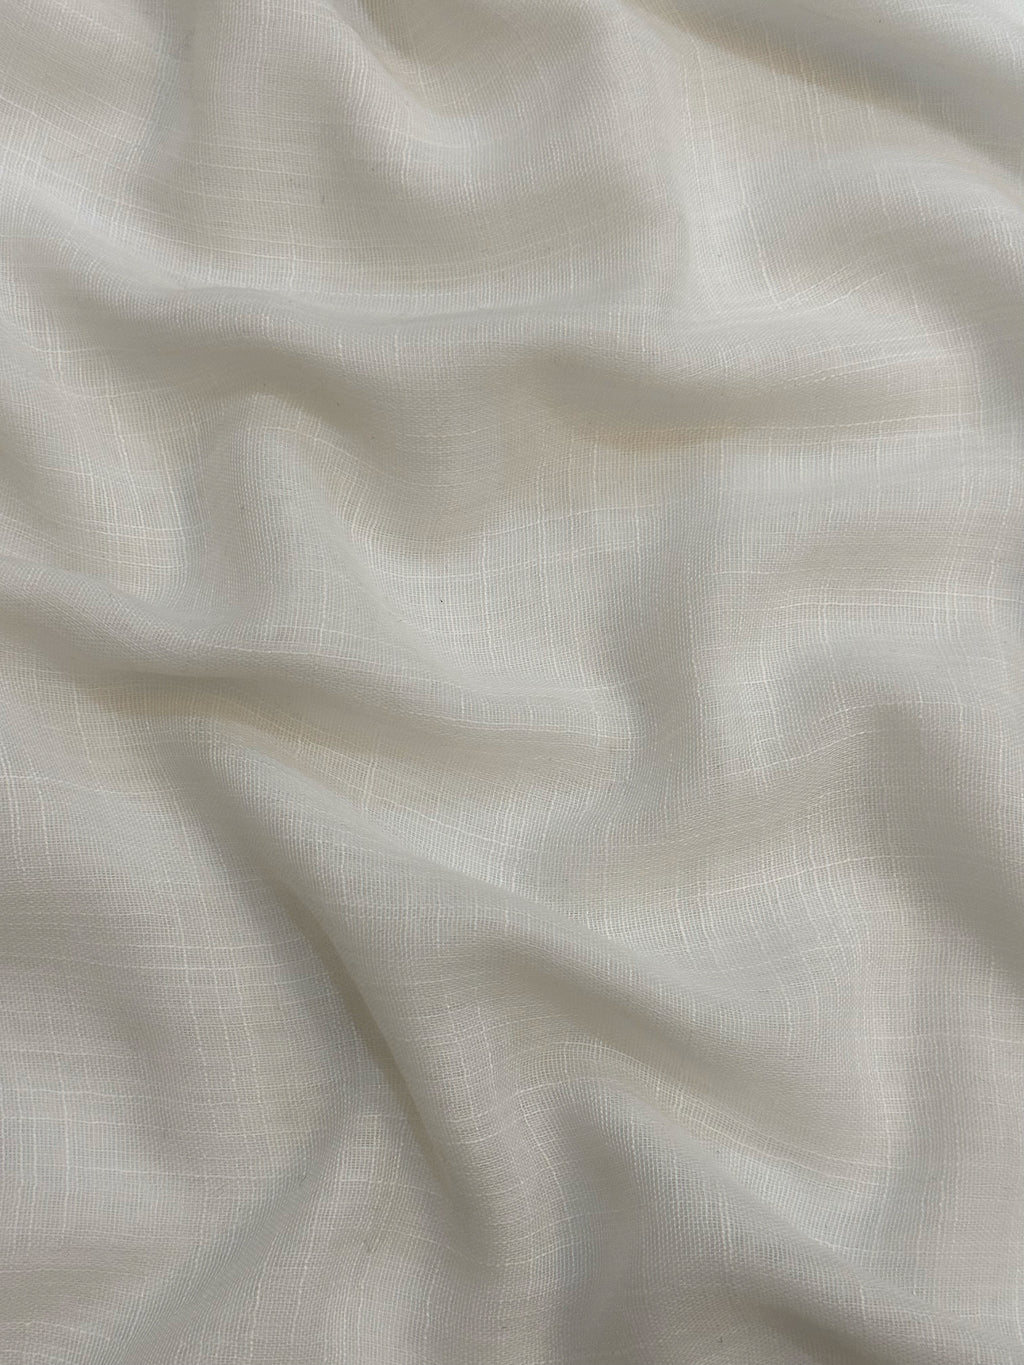 Textured Lawn Viscose - Pearl White